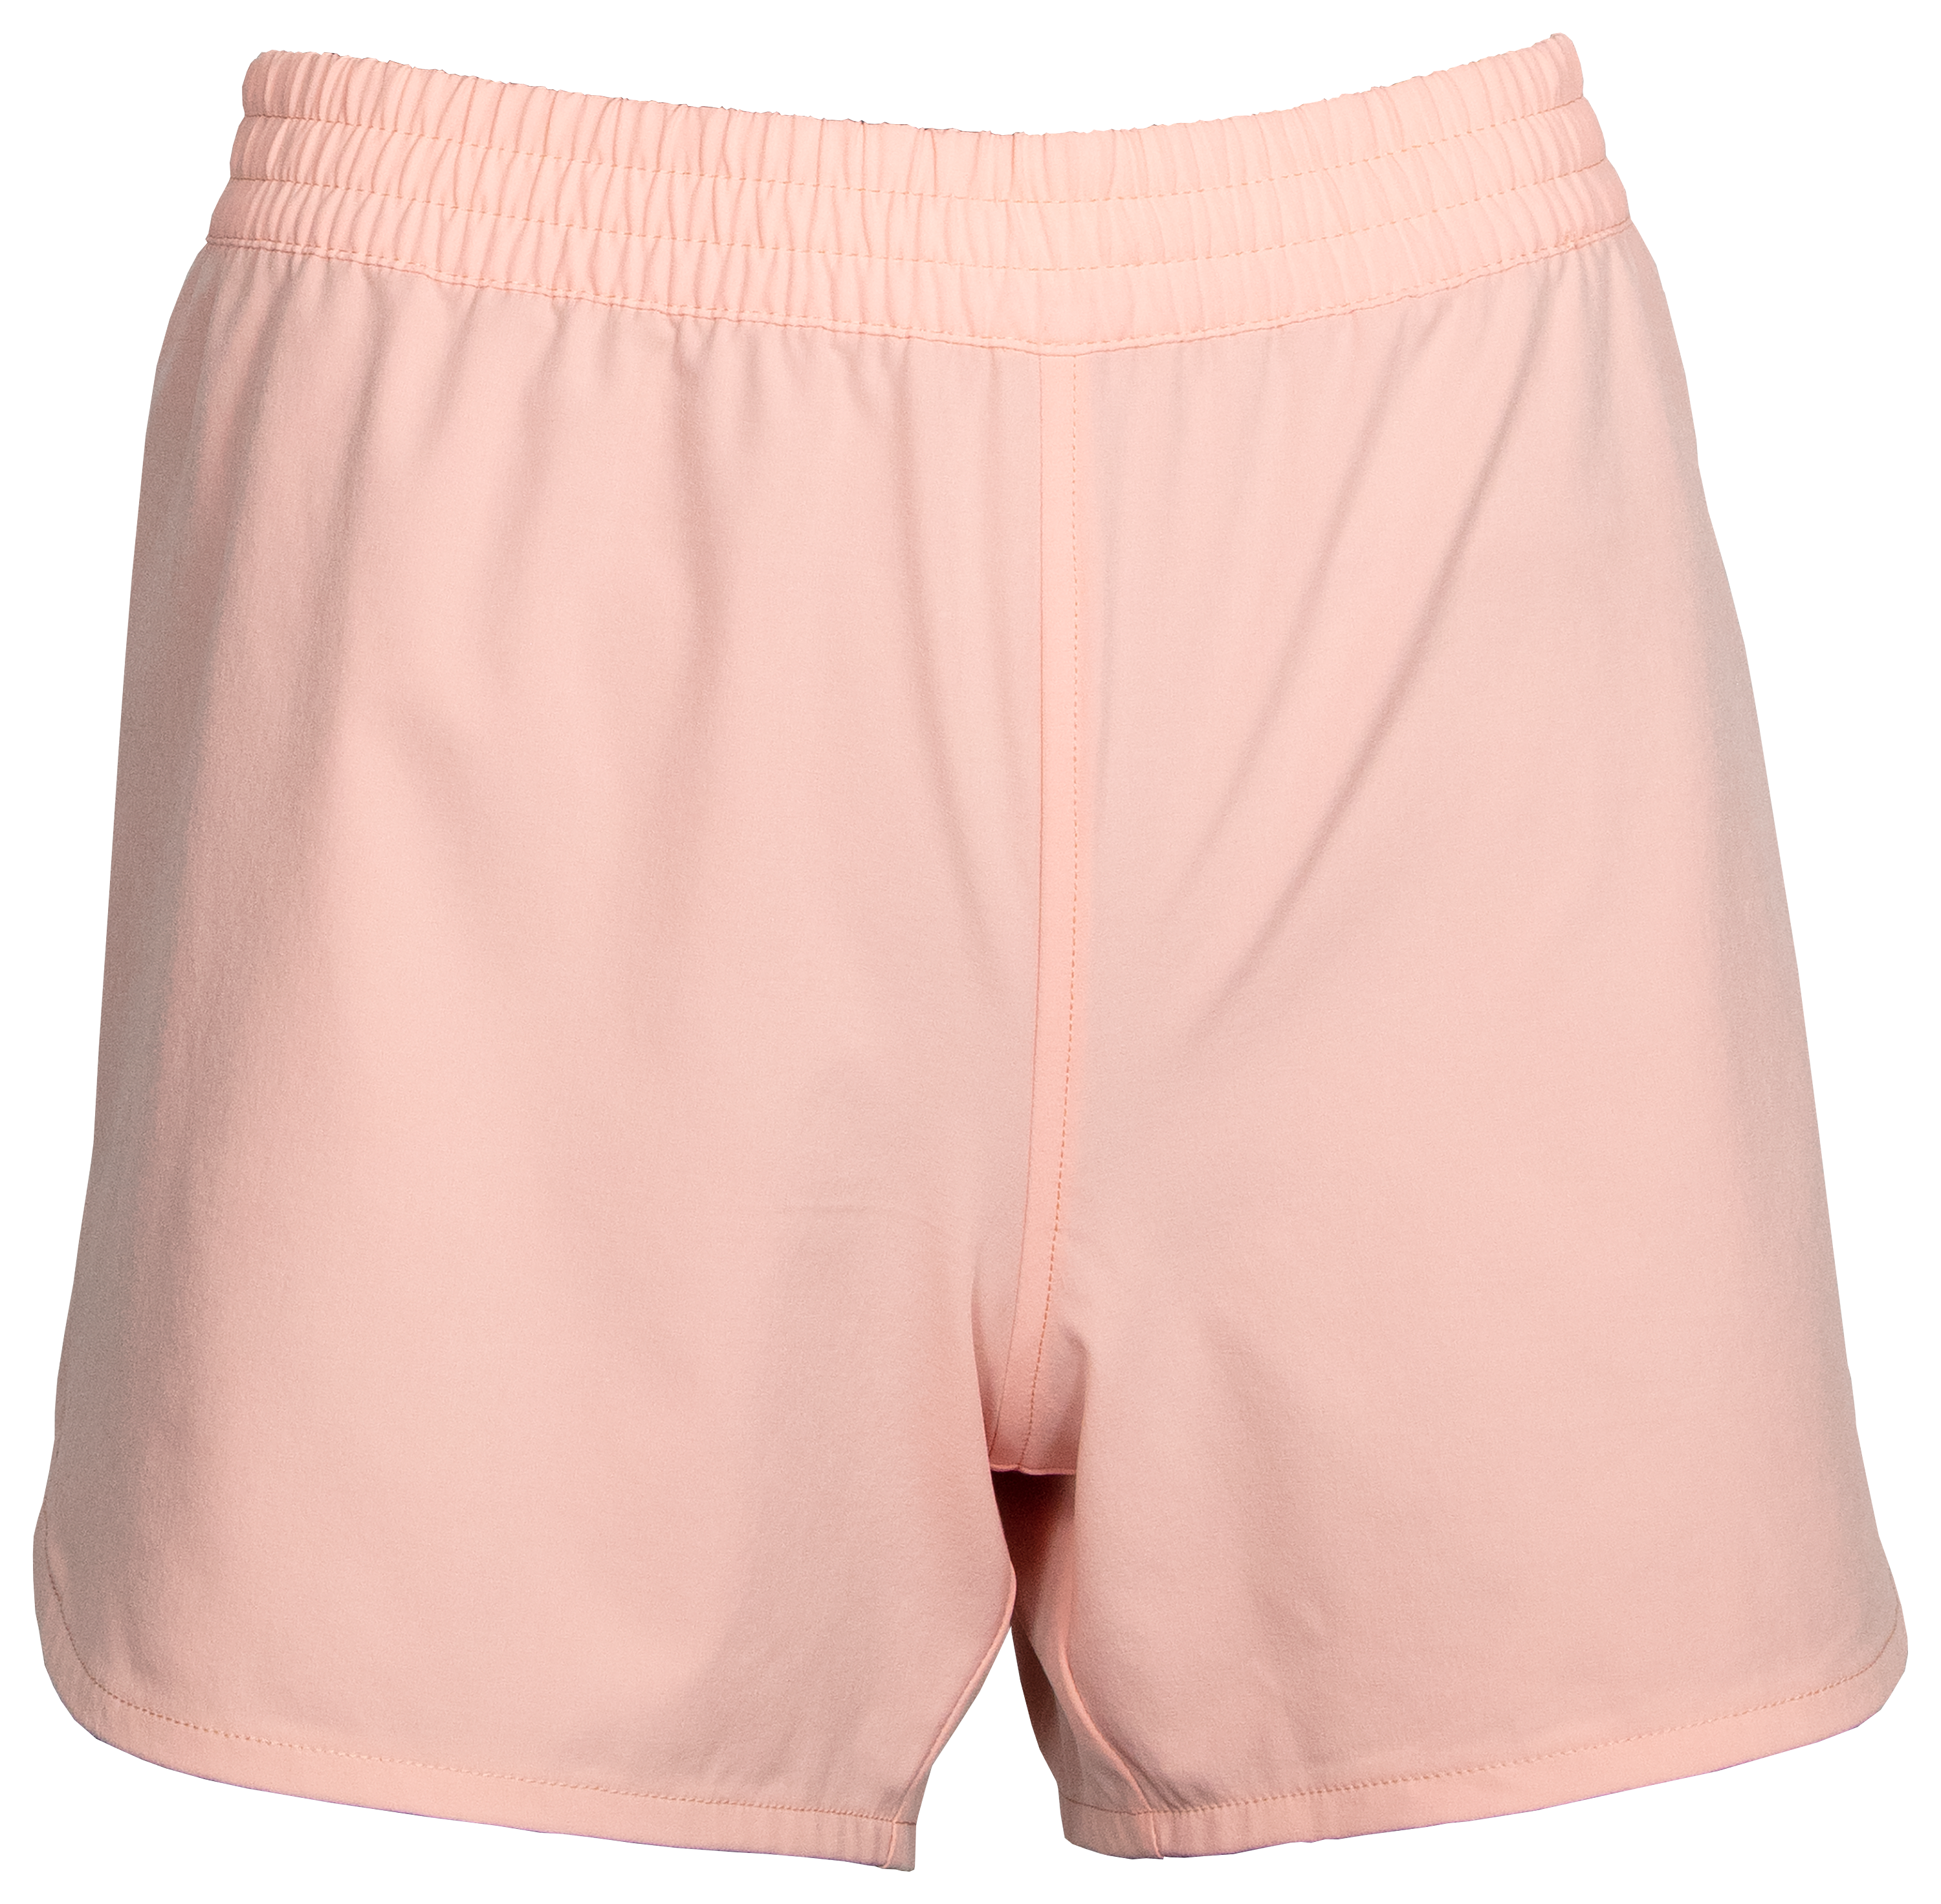 World Wide Sportsman Charter Print Pull-On Shorts for Ladies - Candlelight Peach - XXL